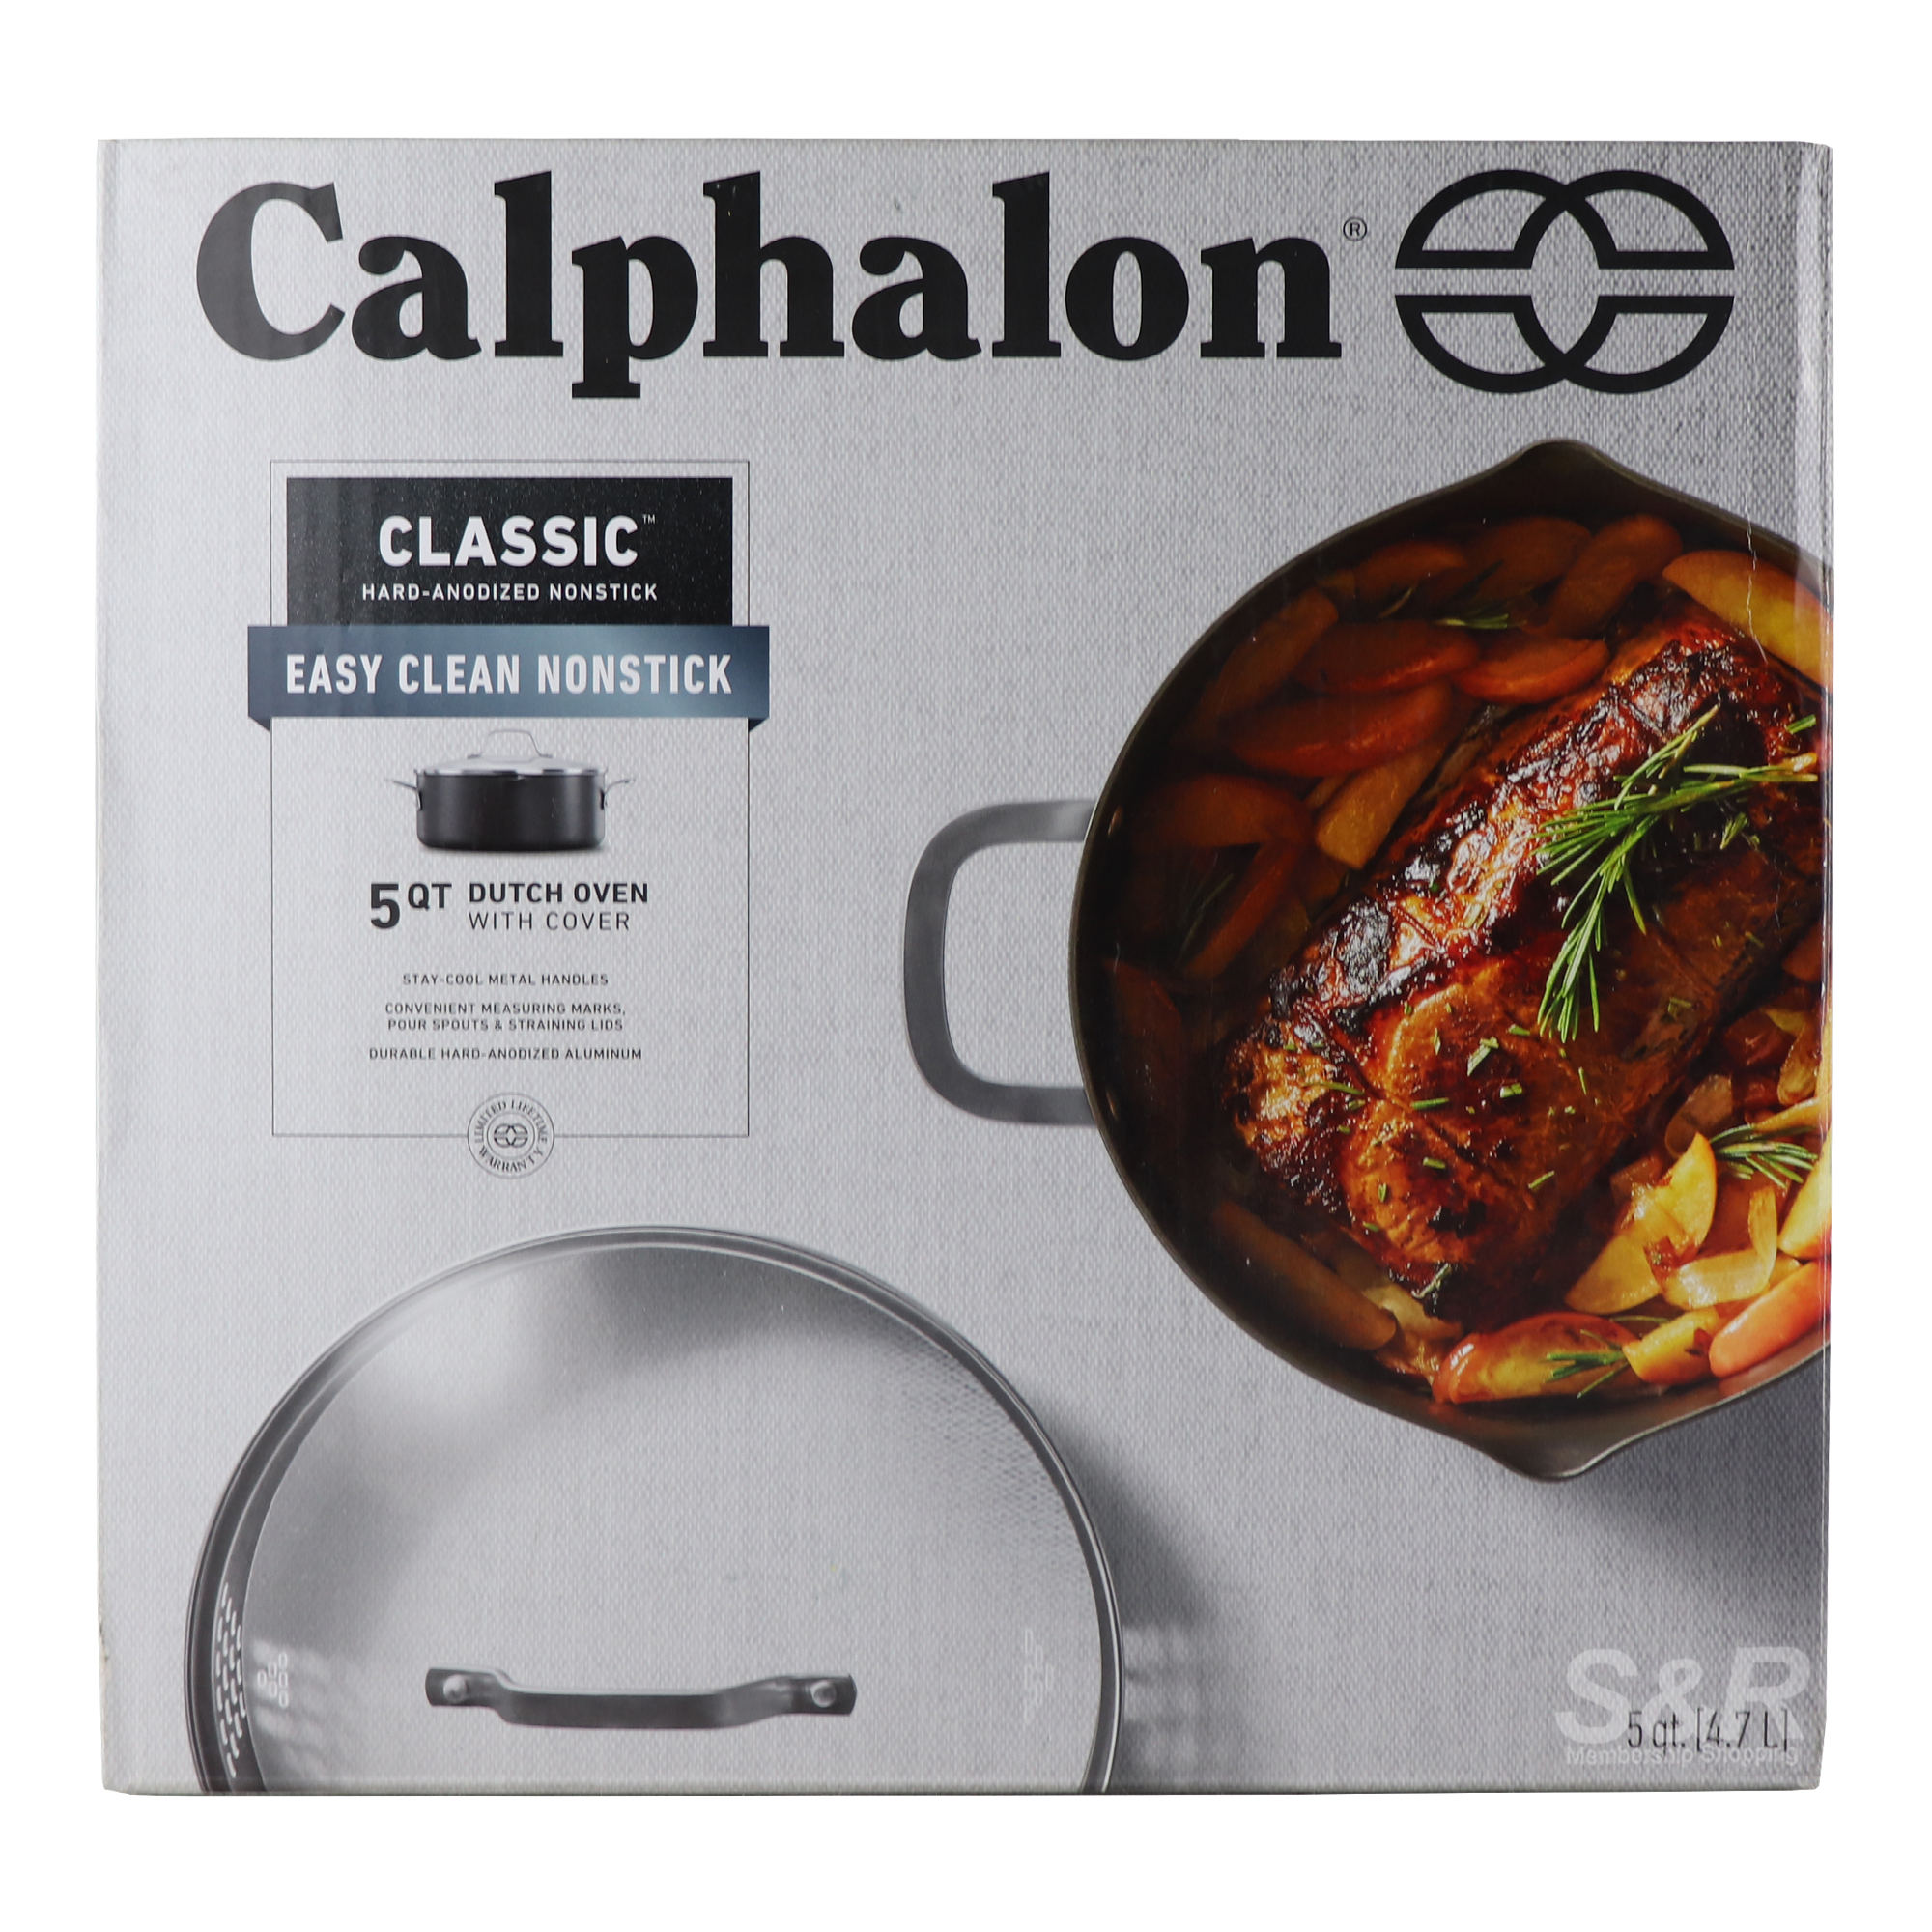 https://www.snrshopping.com/upload/product/Calphalon-Classic-5qt-Dutch-Oven-with-Cover-1pc-9870/Calphalon%20Classic%205qt%20Dutch%20Oven%20with%20Cover%201pc-dgsKhjc3rJ.jpg